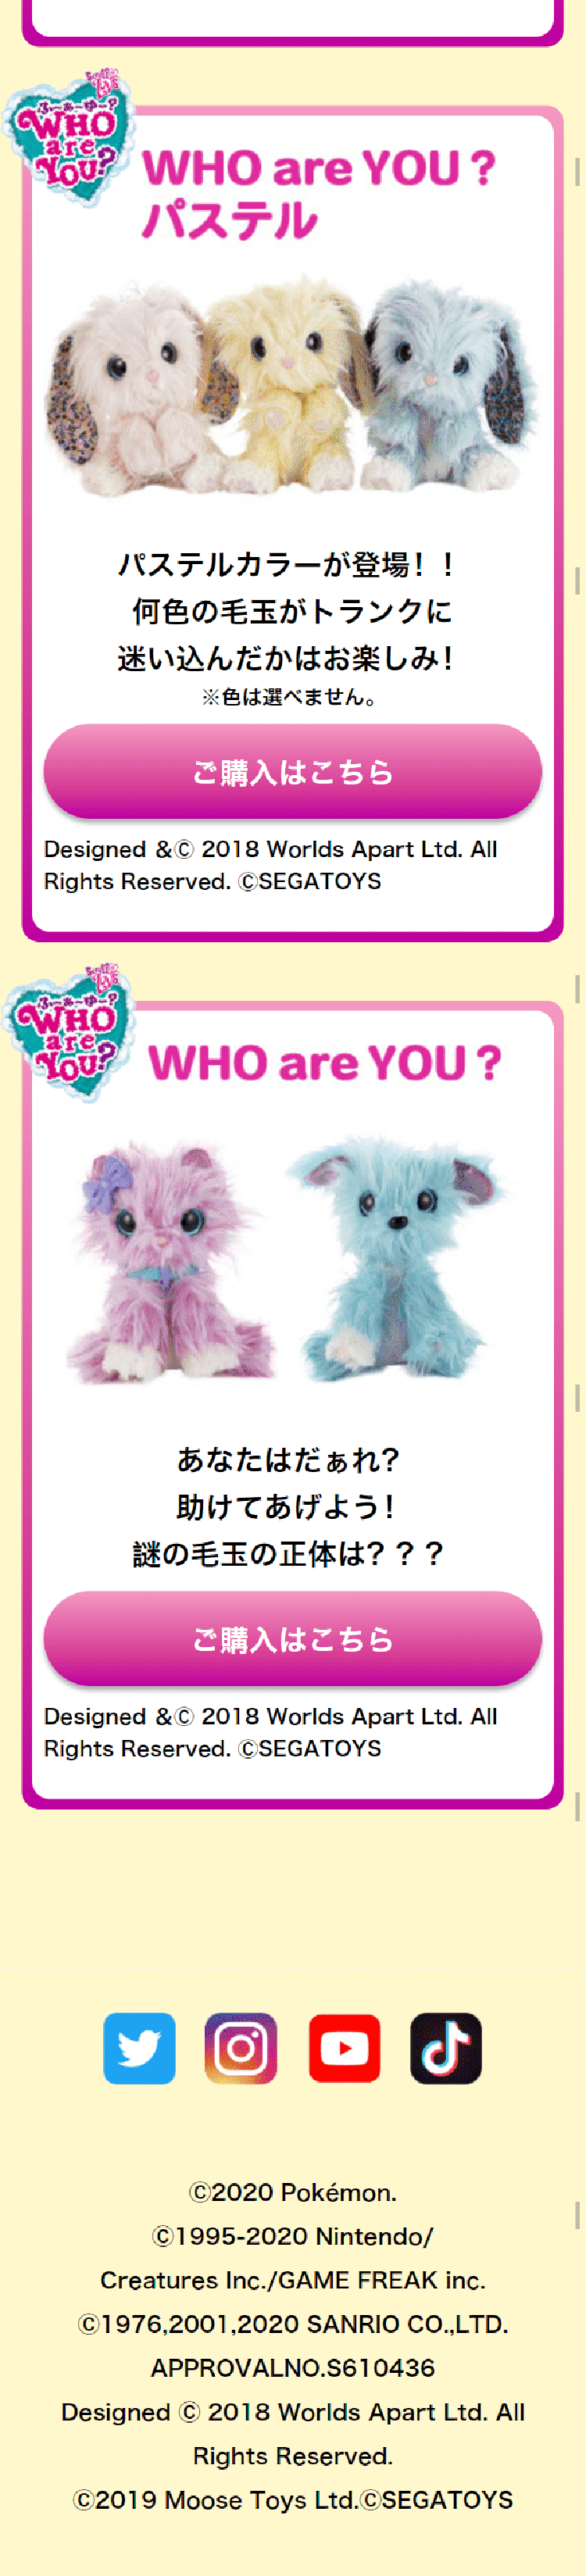 WHO are YOU?_sp_2